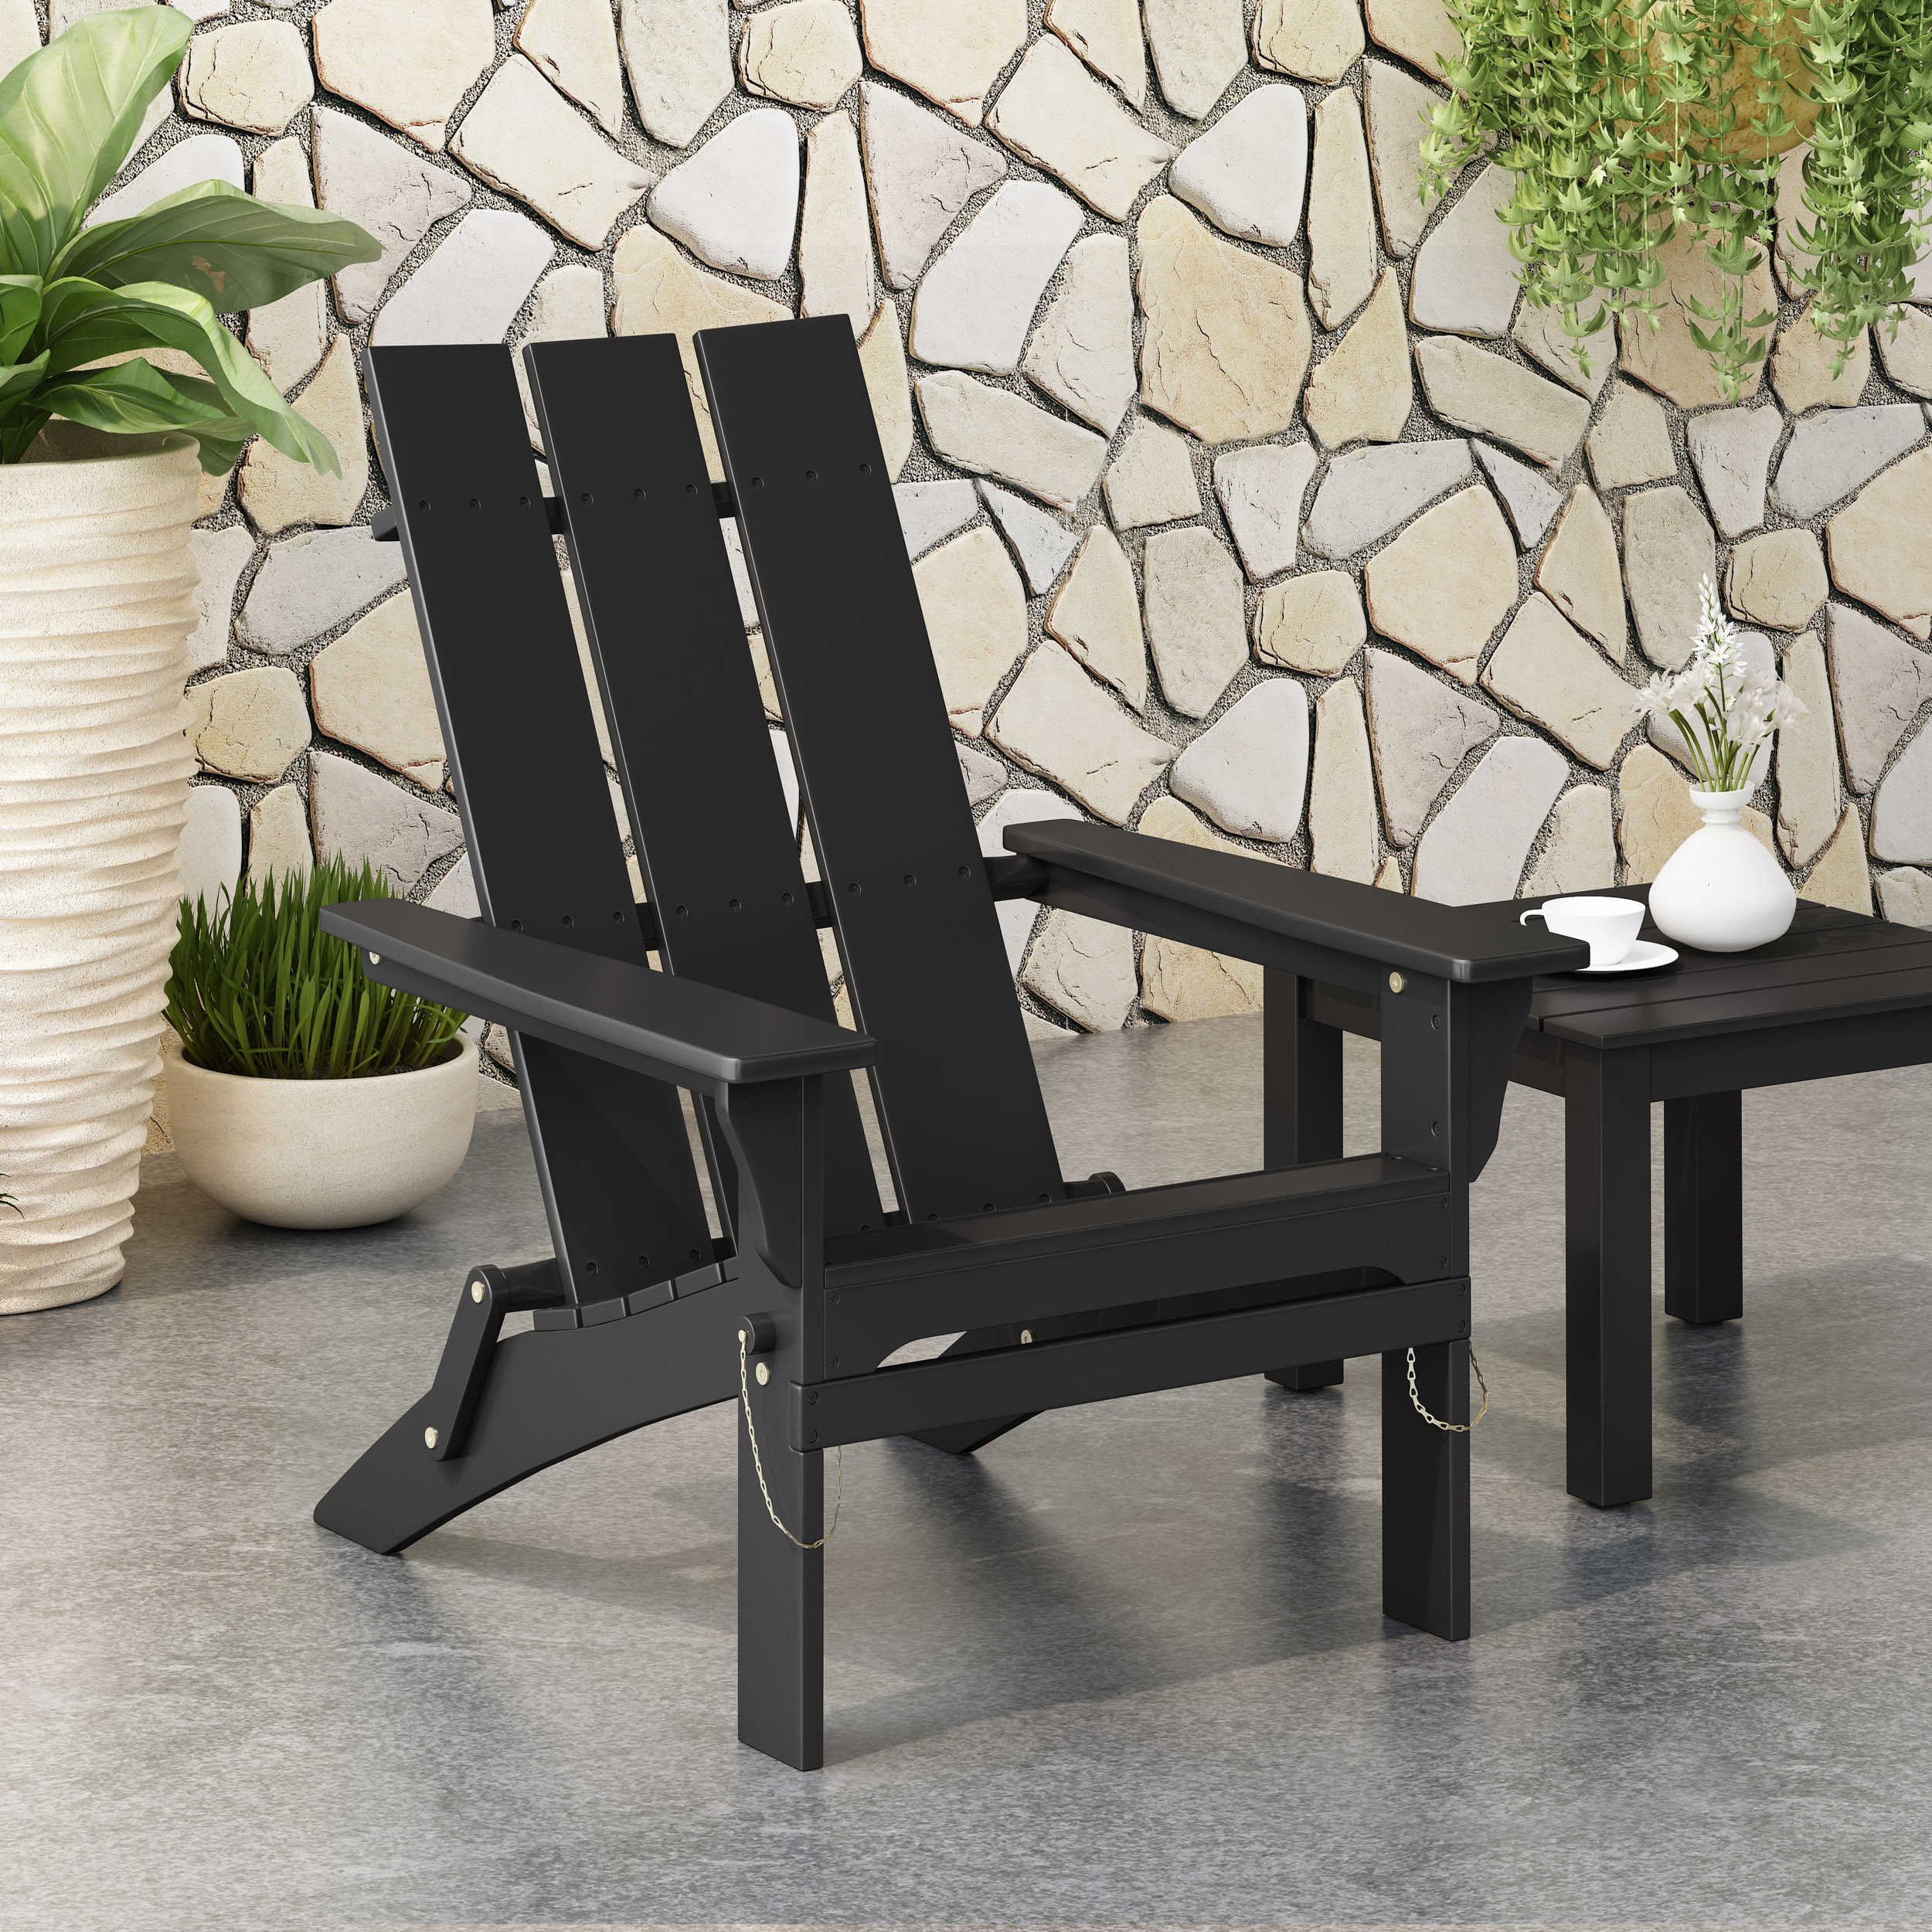 KUIKUI Outdoor Classic Pure Black Solid Wood Chair Garden Lounge Chair Foldable - image 2 of 7